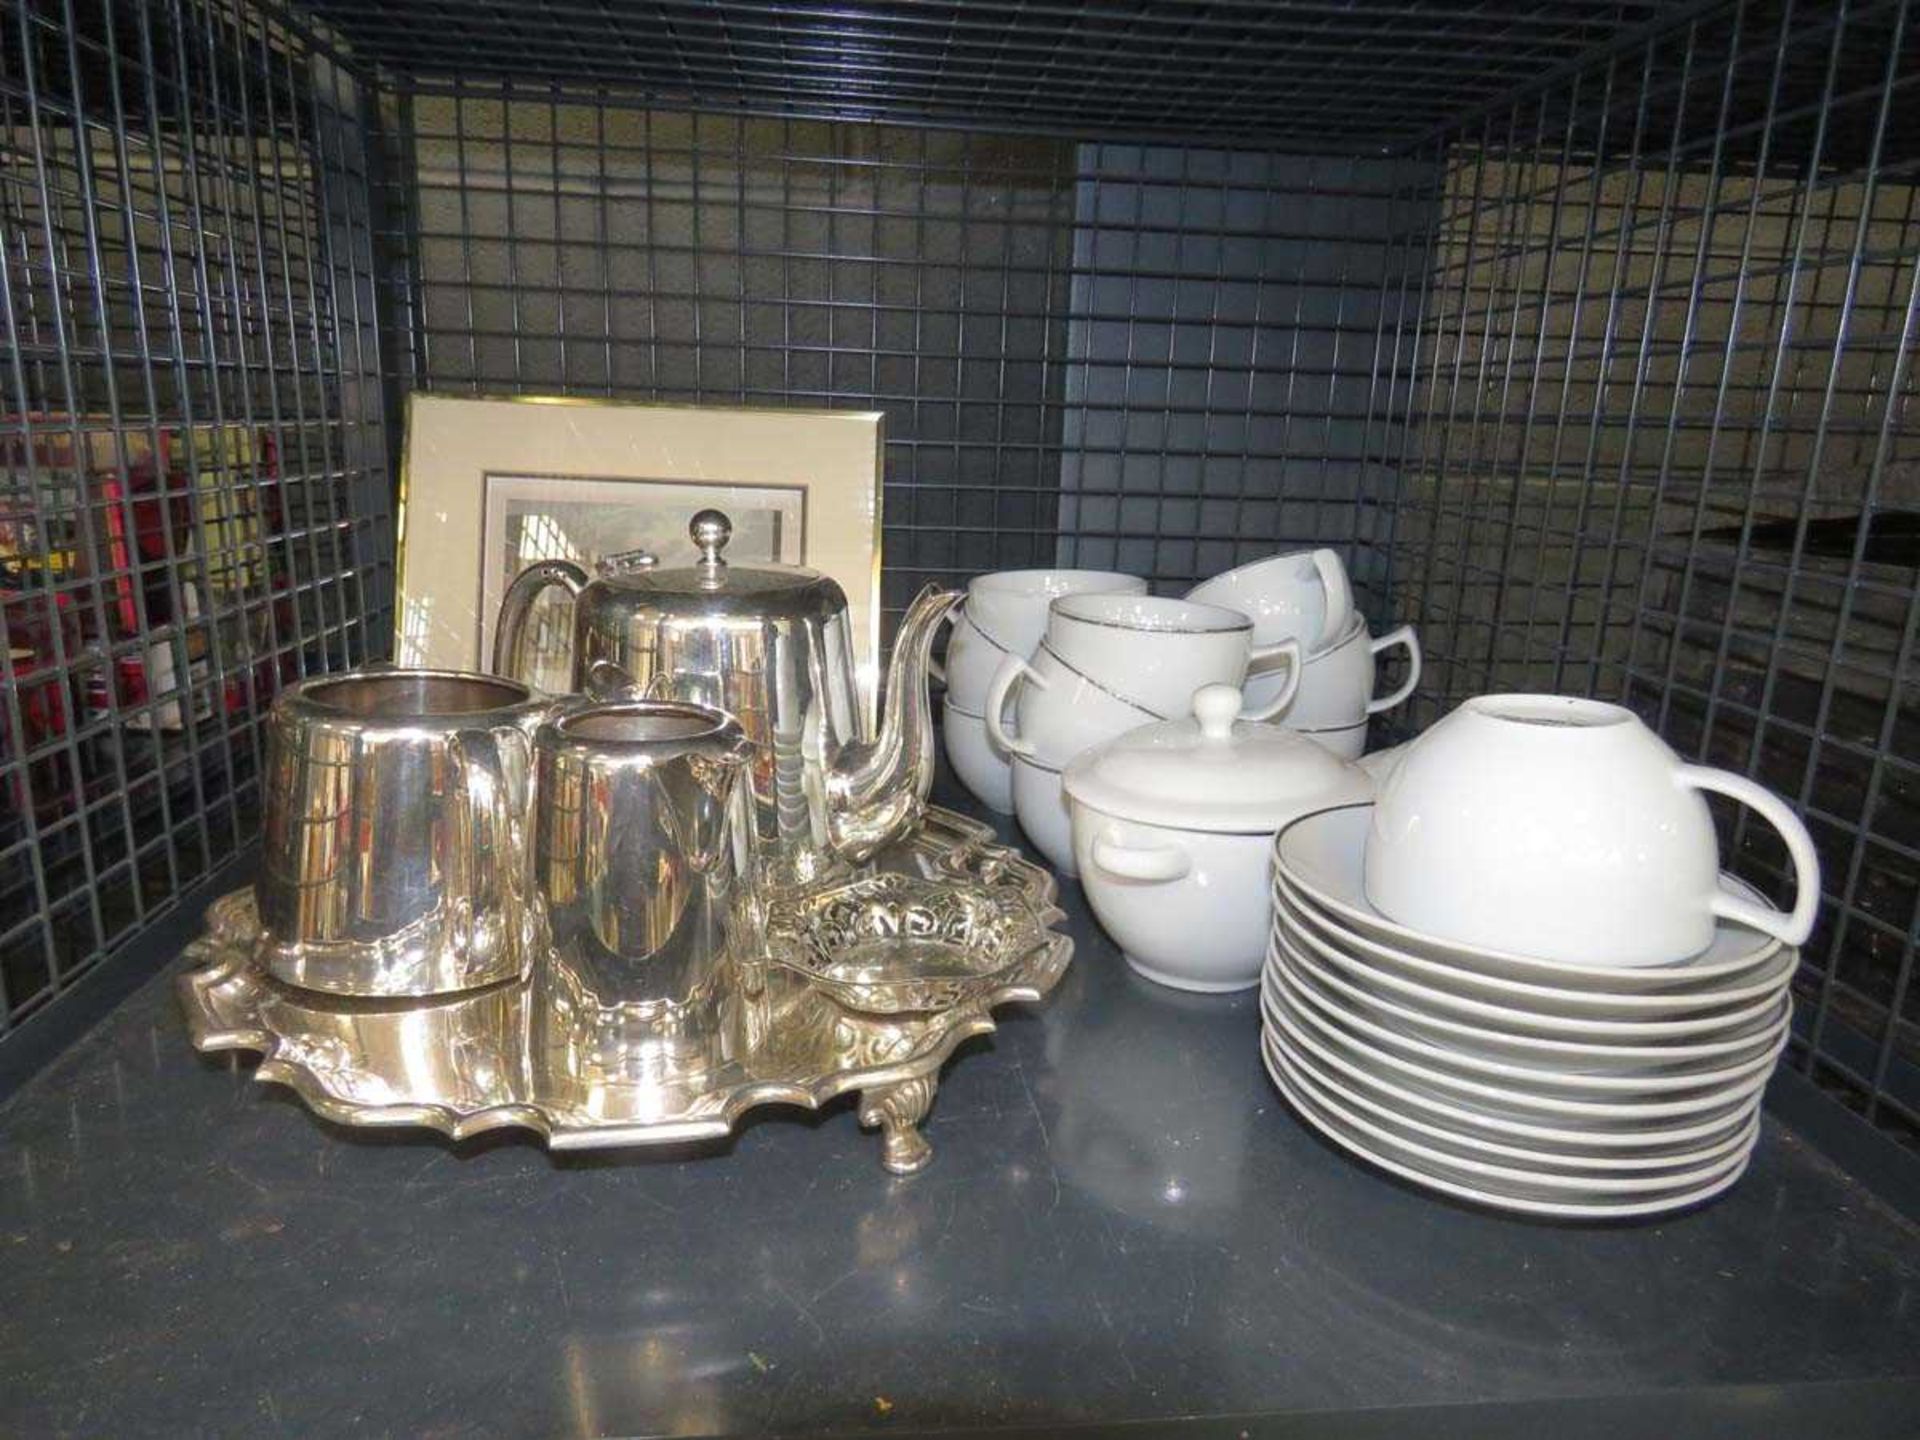 Cage containing an urban engraving, silver plated tea service, silver rimmed cup, saucers and 2